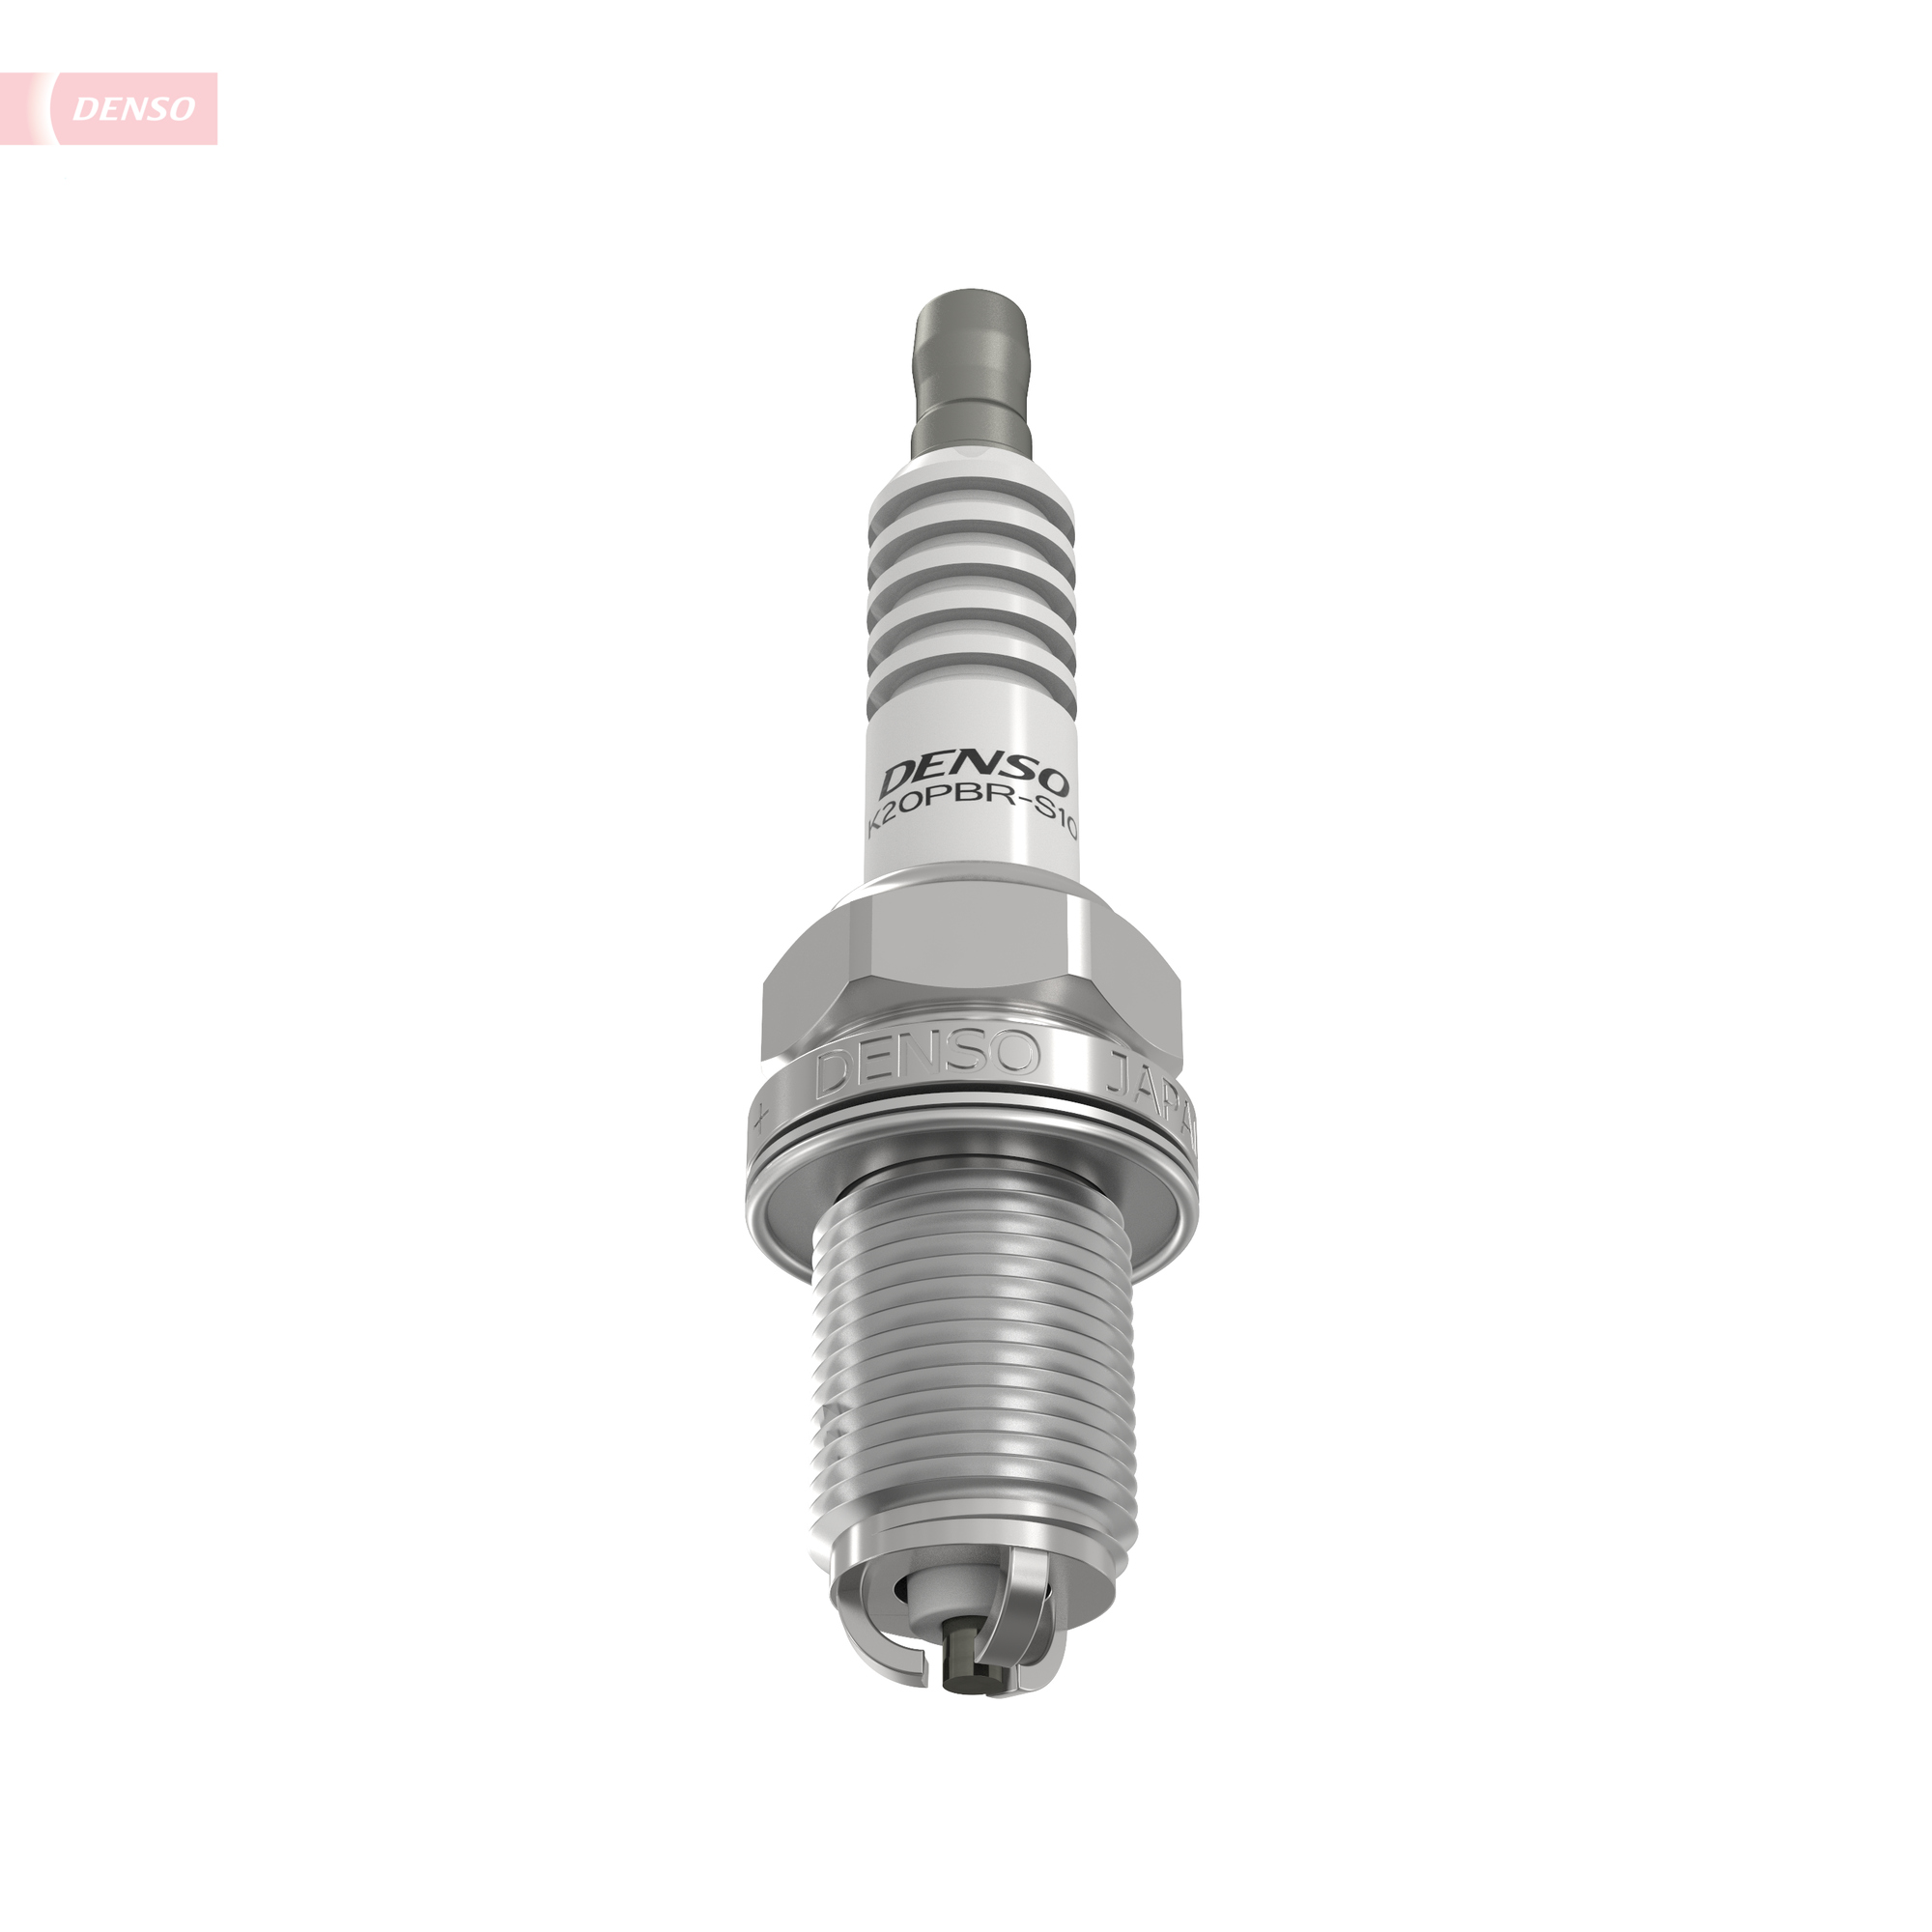 Picture of DENSO - K20PBR-S10 - Spark Plug (Ignition System)